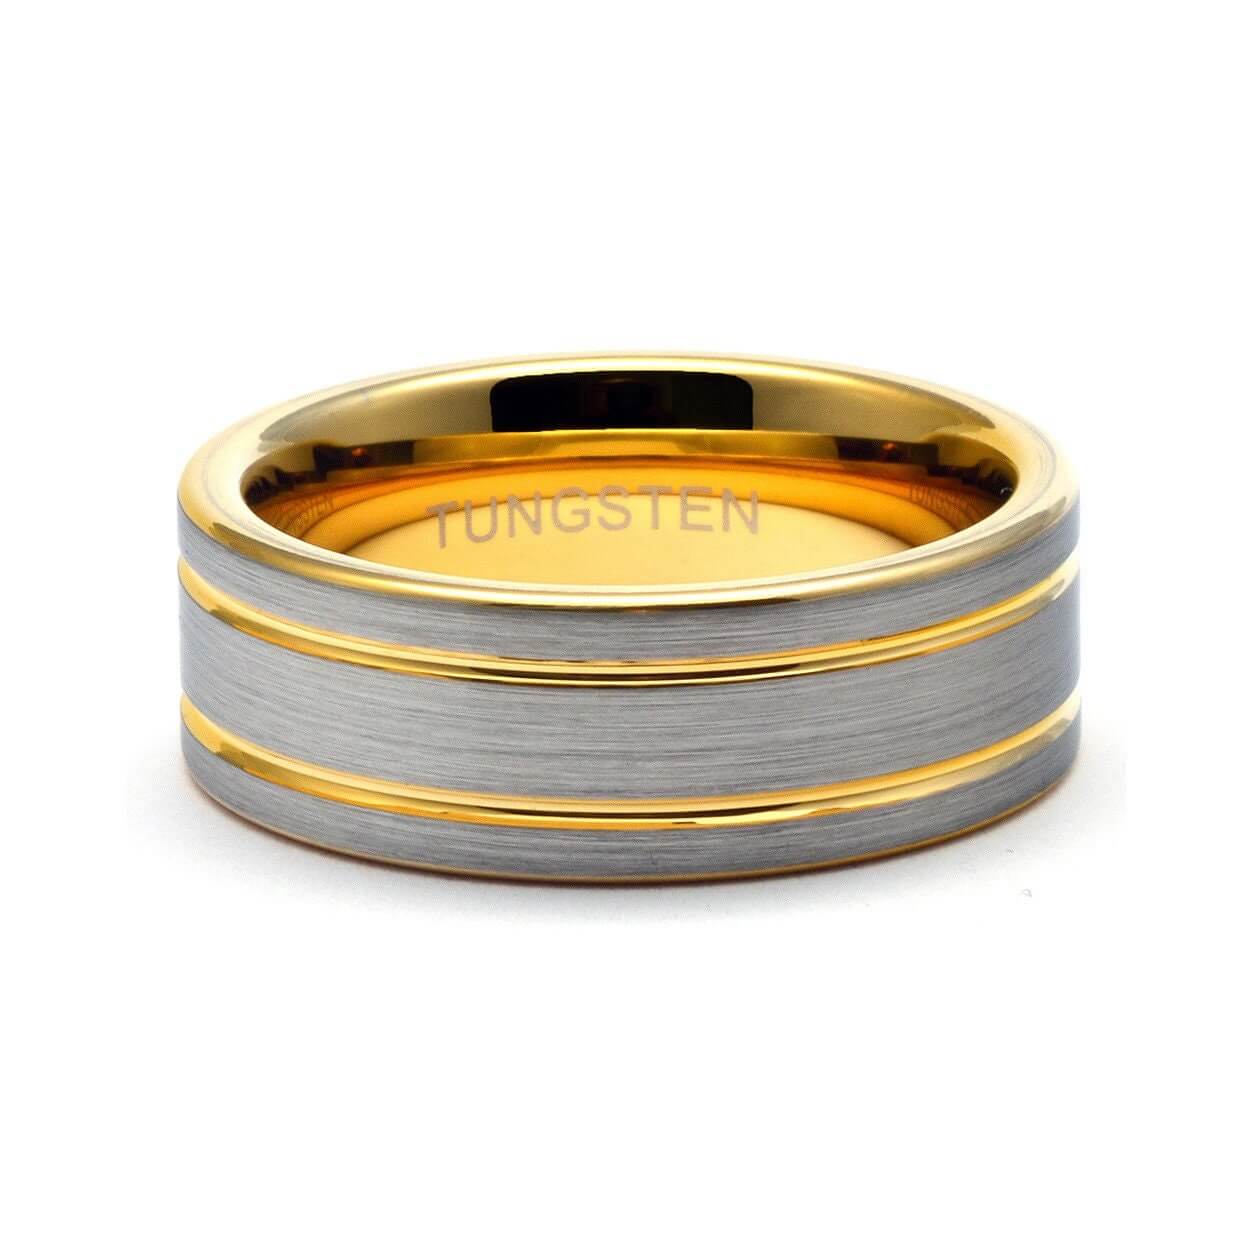 Gold Tungsten Ring, Wedding Band for Men, Ring for Men, Gold Tungsten Band, Mens Wedding Band, Tungsten Band, Gifts for Him